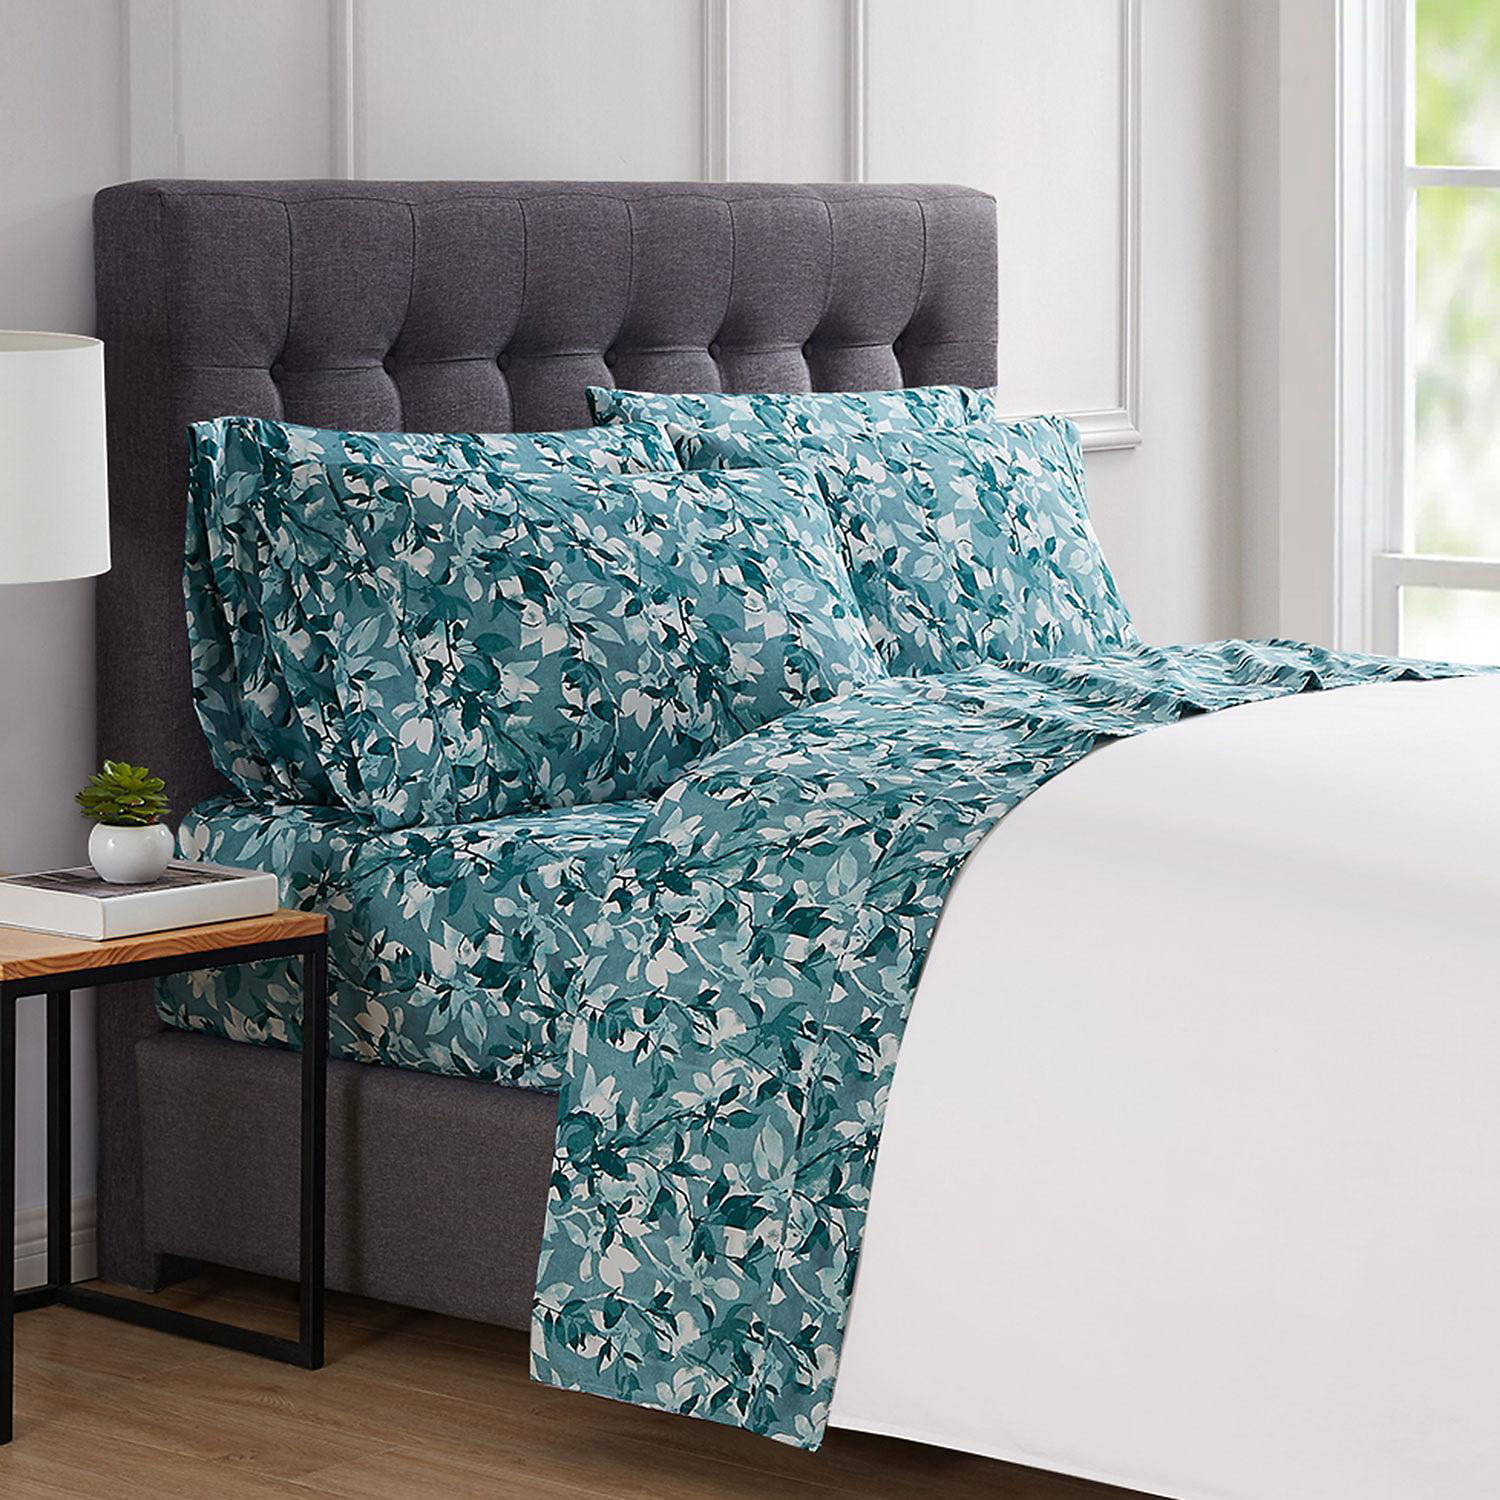 London Fog Bed Sheets - How To Blog